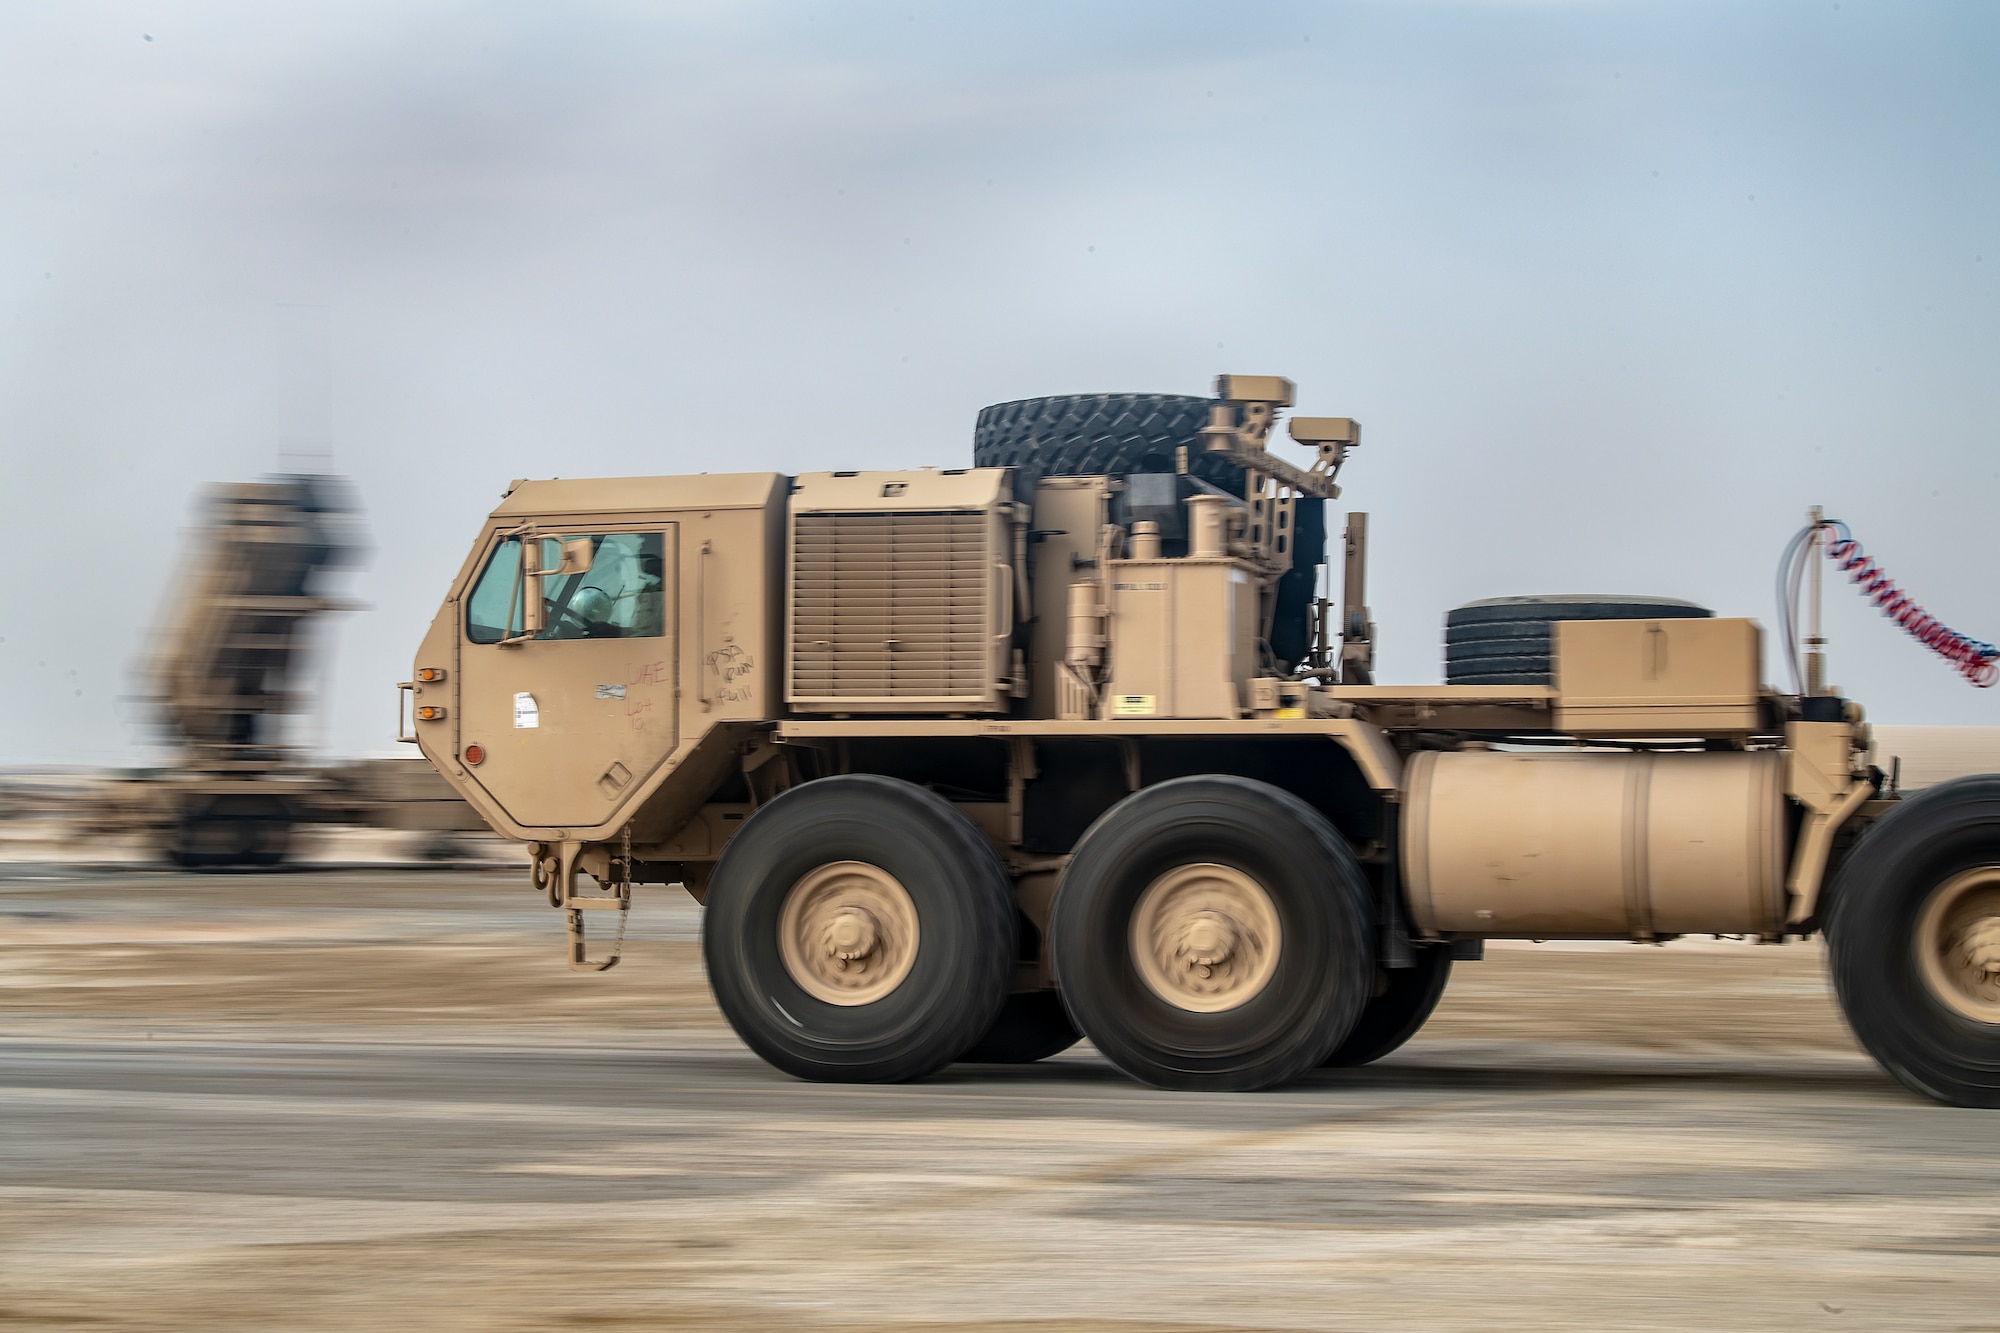 Soldiers from Alpha Battery 5-52 Air Defense Artillery Battalion perform Prepare for Movement and Emplacement in addition to a tactical convoy in order to conduct mobility exercises at Al Dhafra Air Base, United Arab Emirates, Aug. 21, 2020.